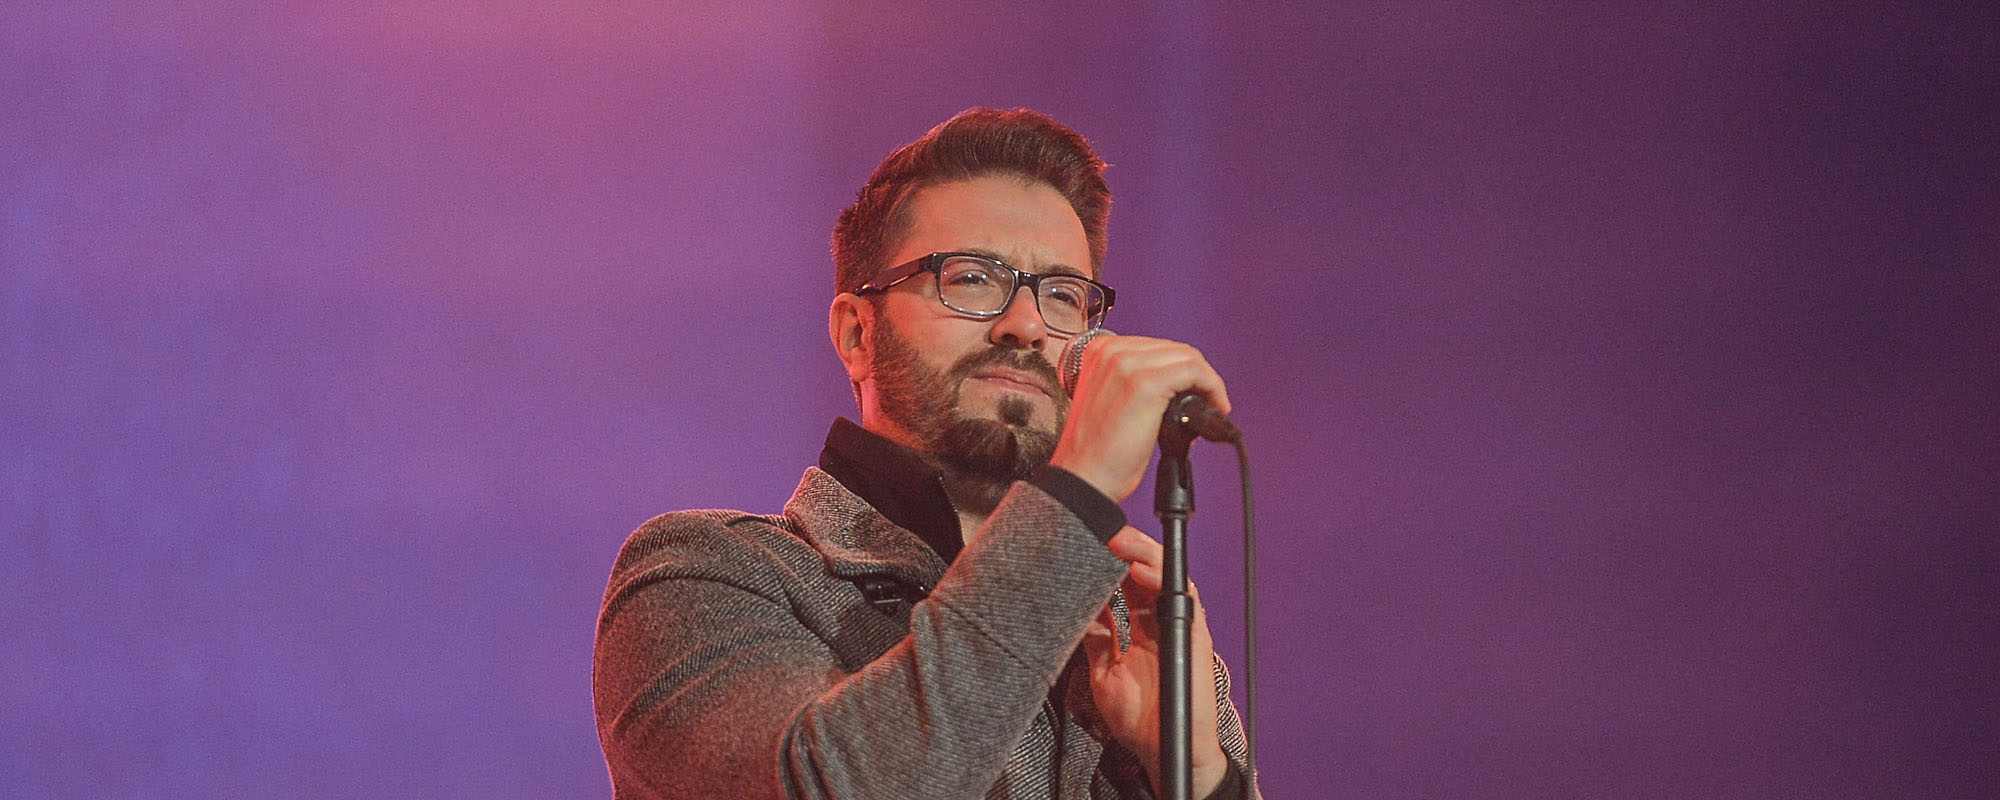 Danny Gokey Announces Stay Strong Fall Tour